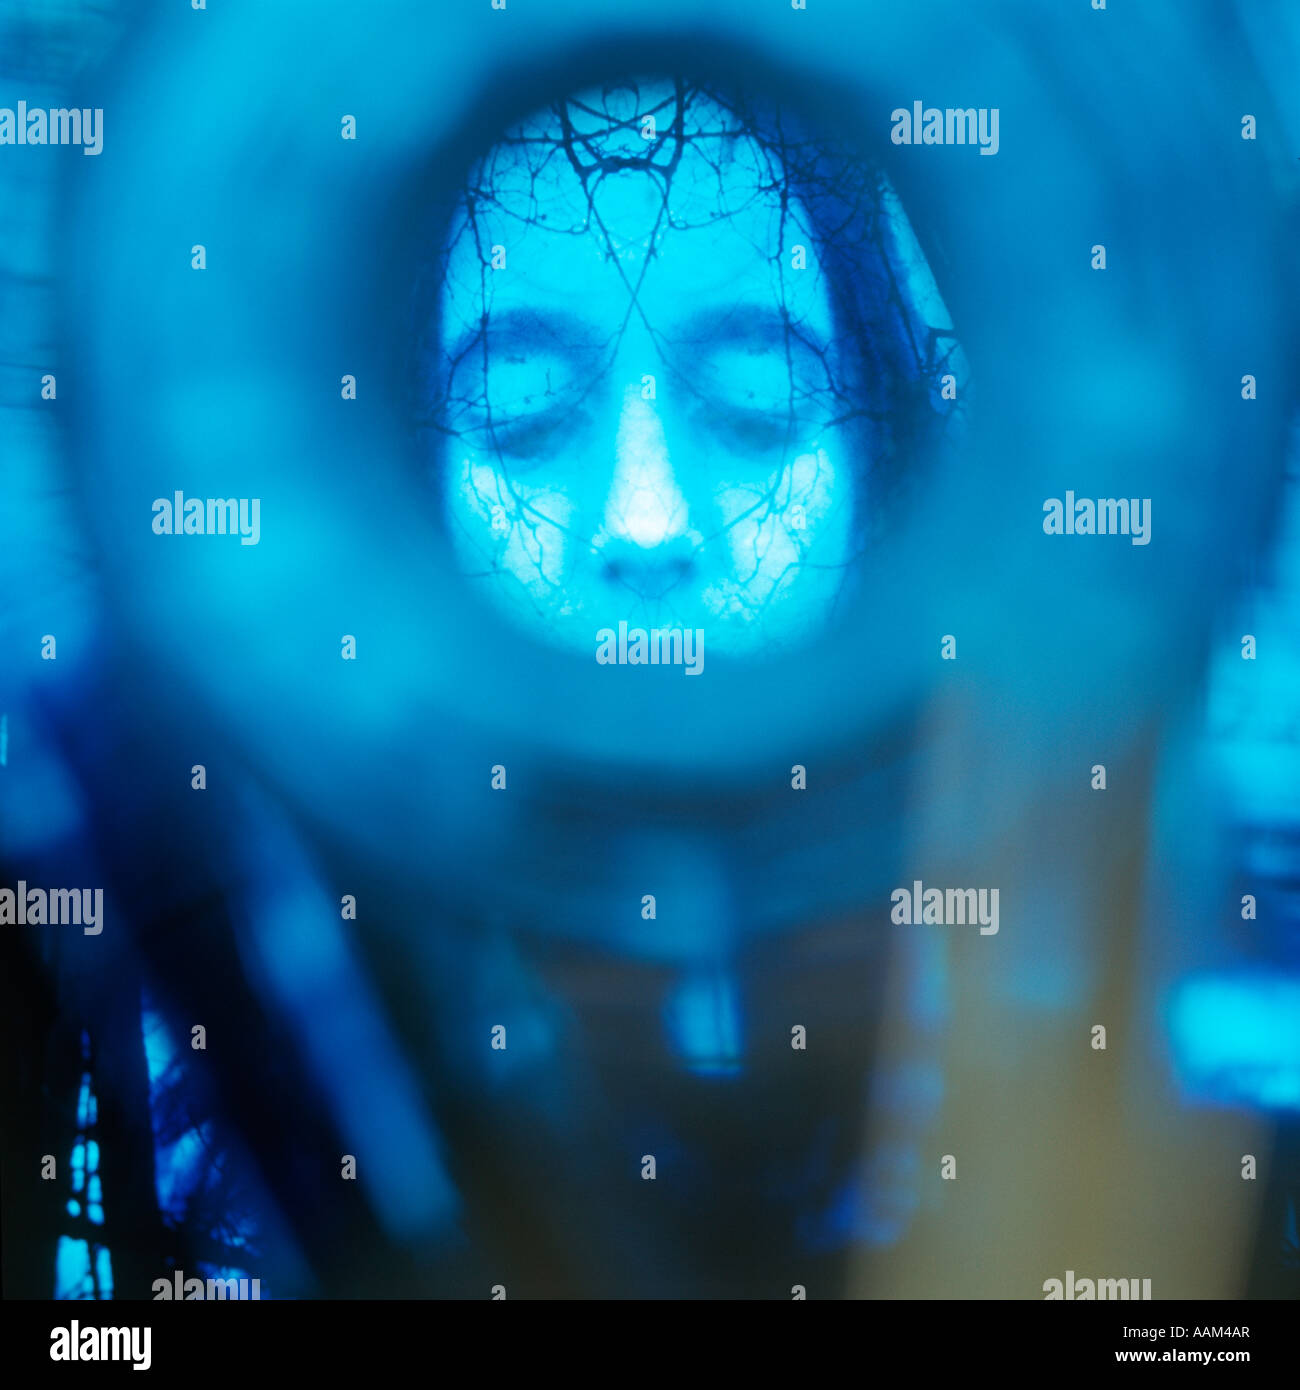 1960s 1970s BIZARRE BLUE GHOSTLY IMAGE OF WOMAN'S FACE OVERLAPPED WITH BRANCHES Stock Photo